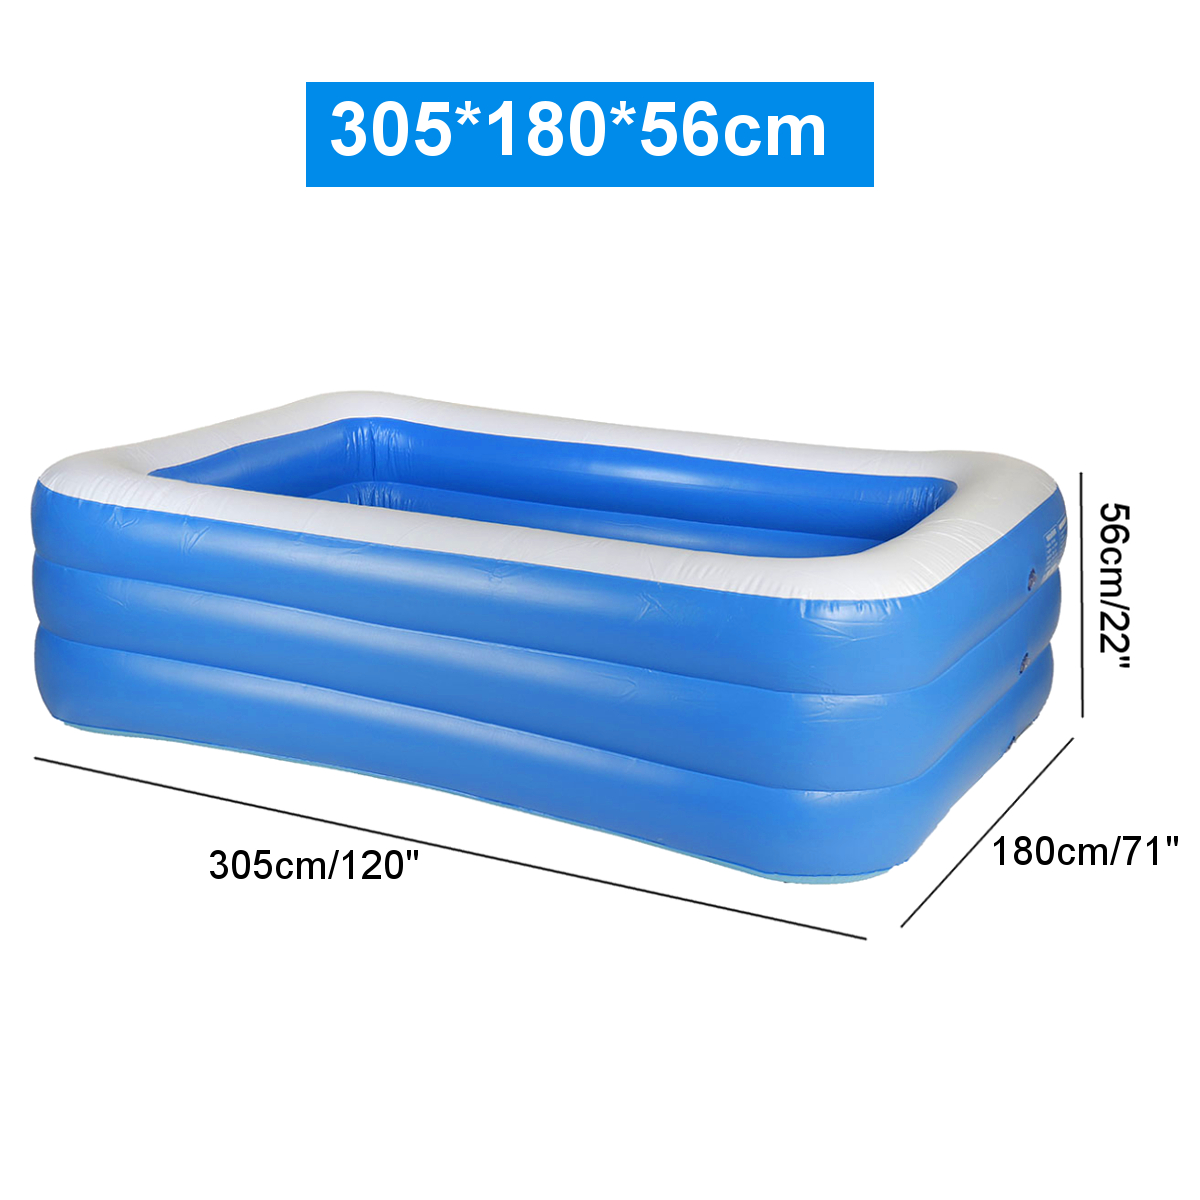 PVC-Thickened-Childrens-Inflatable-Swimming-Pool-Childrens-Pool-Capacity-Large-Bath-Tub-Outdoor-Indo-1842748-12